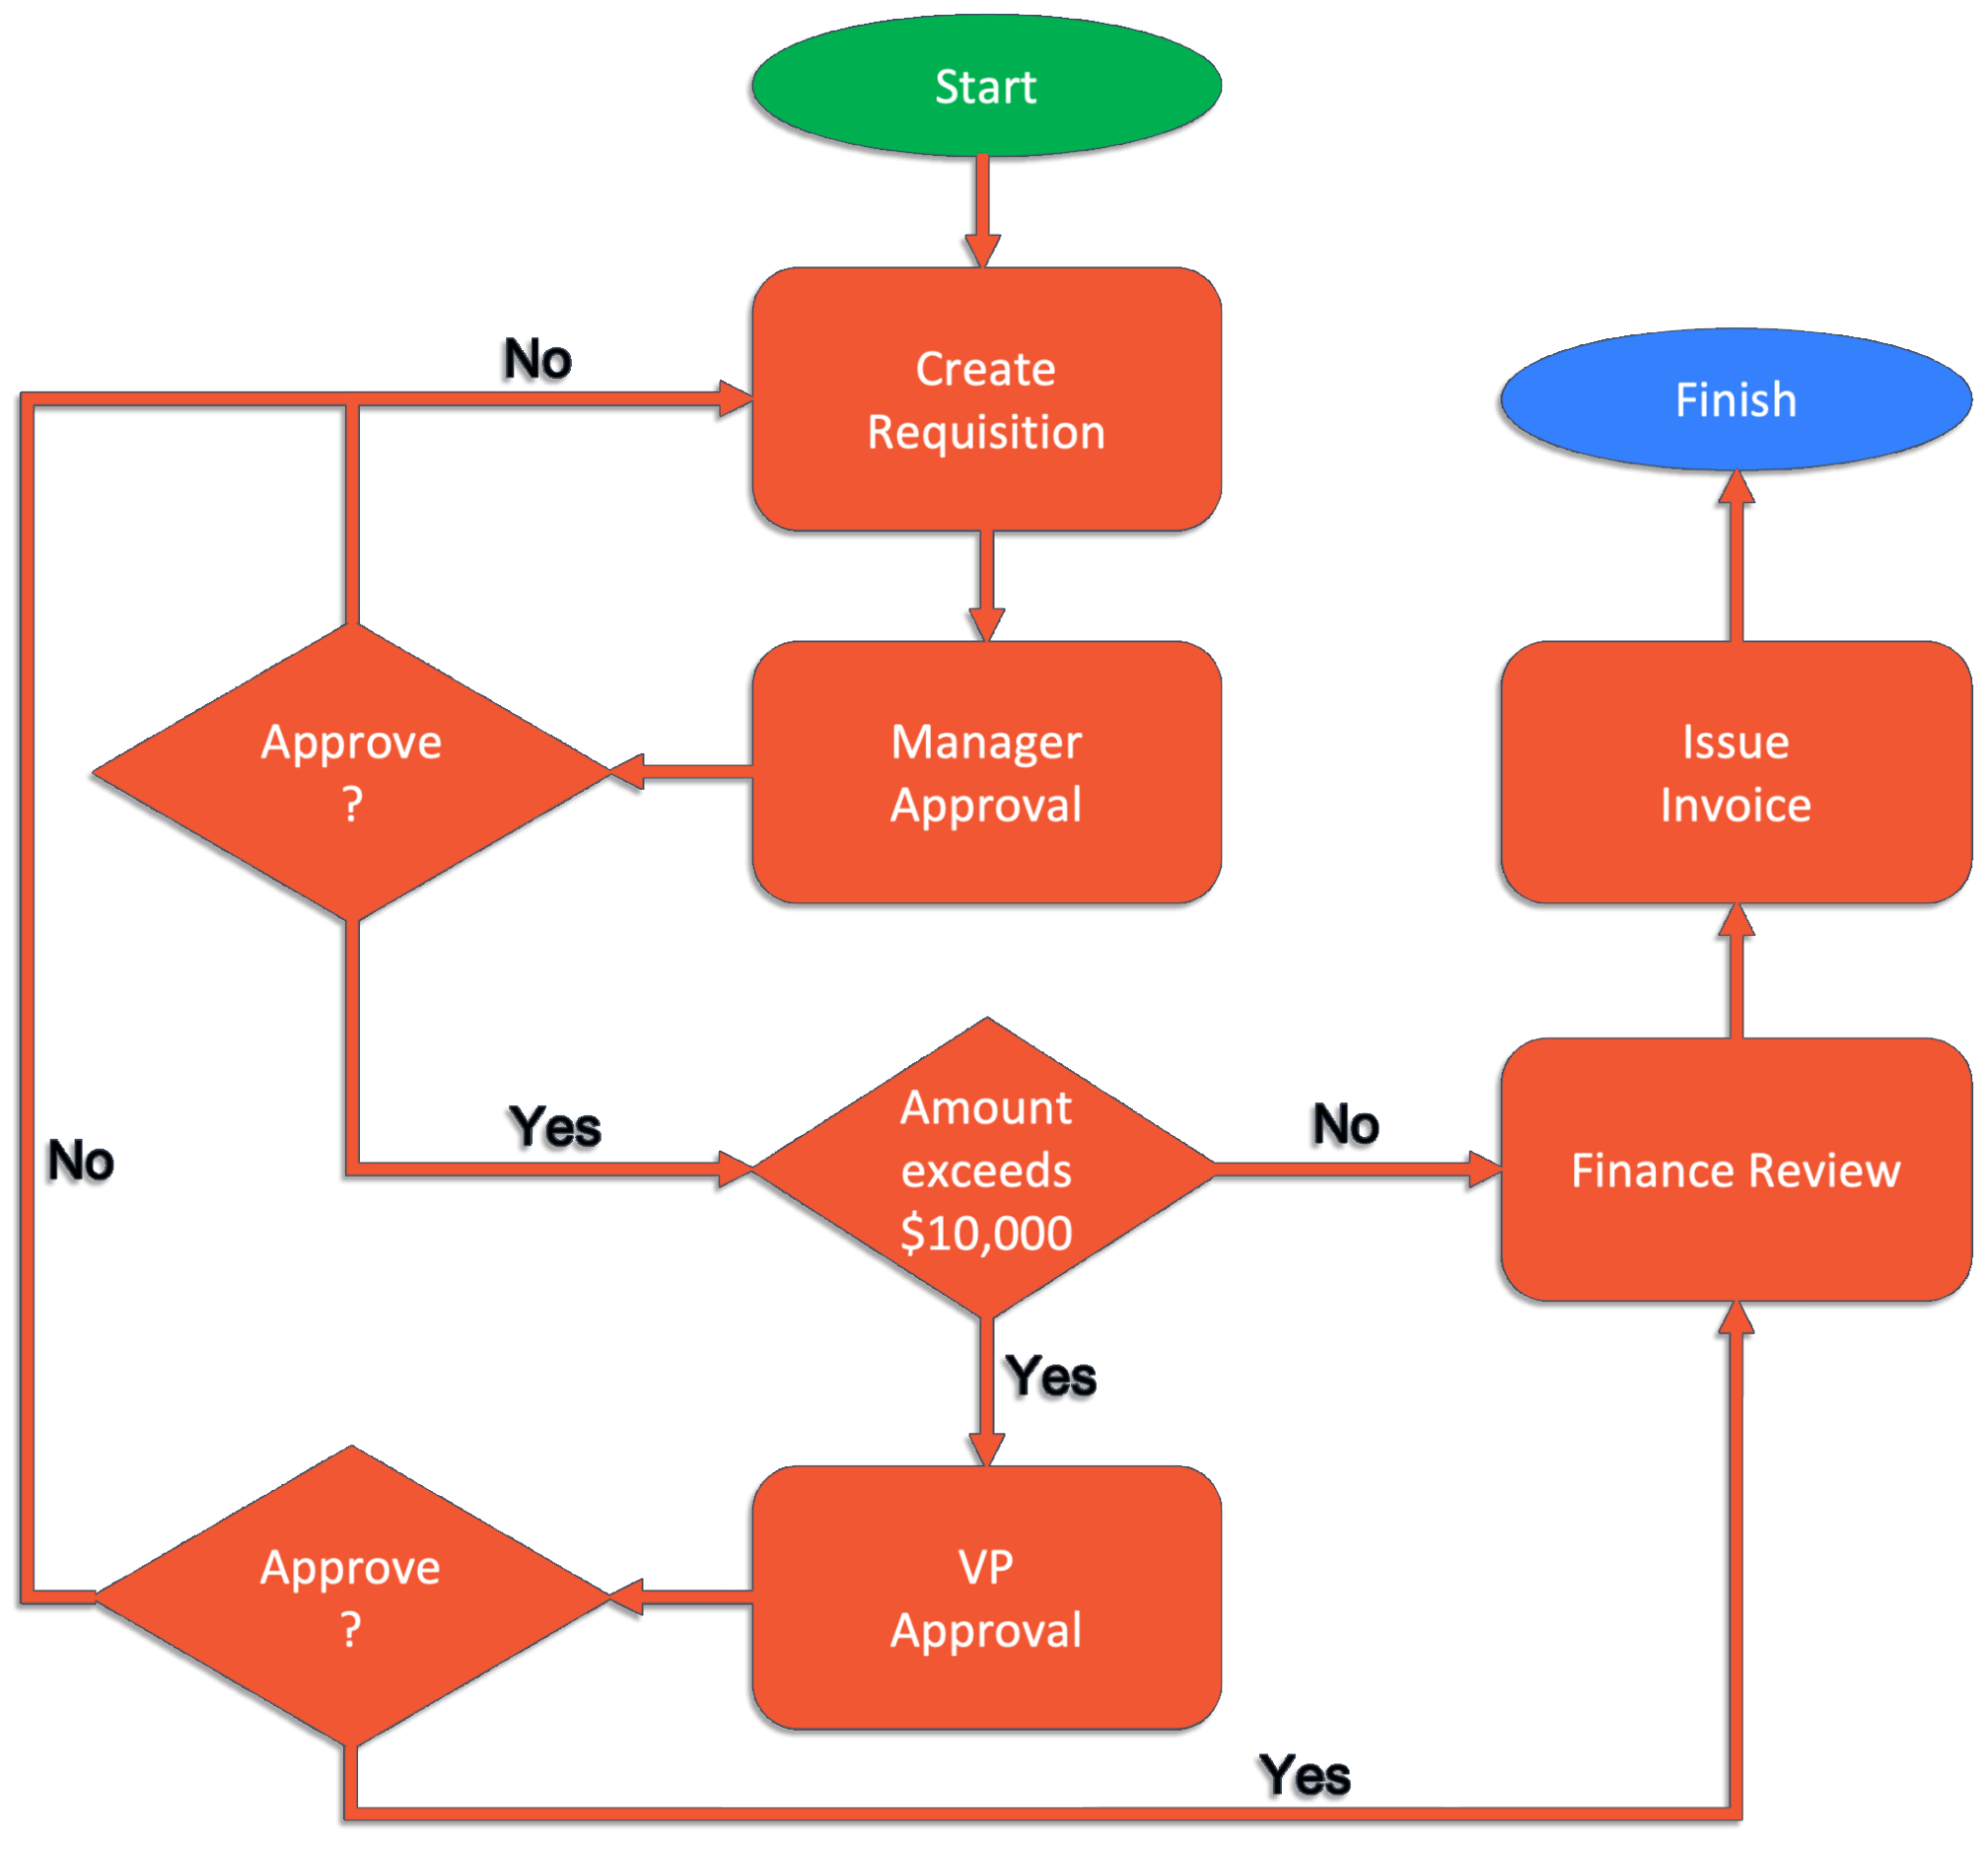 Example of a process flow diagram